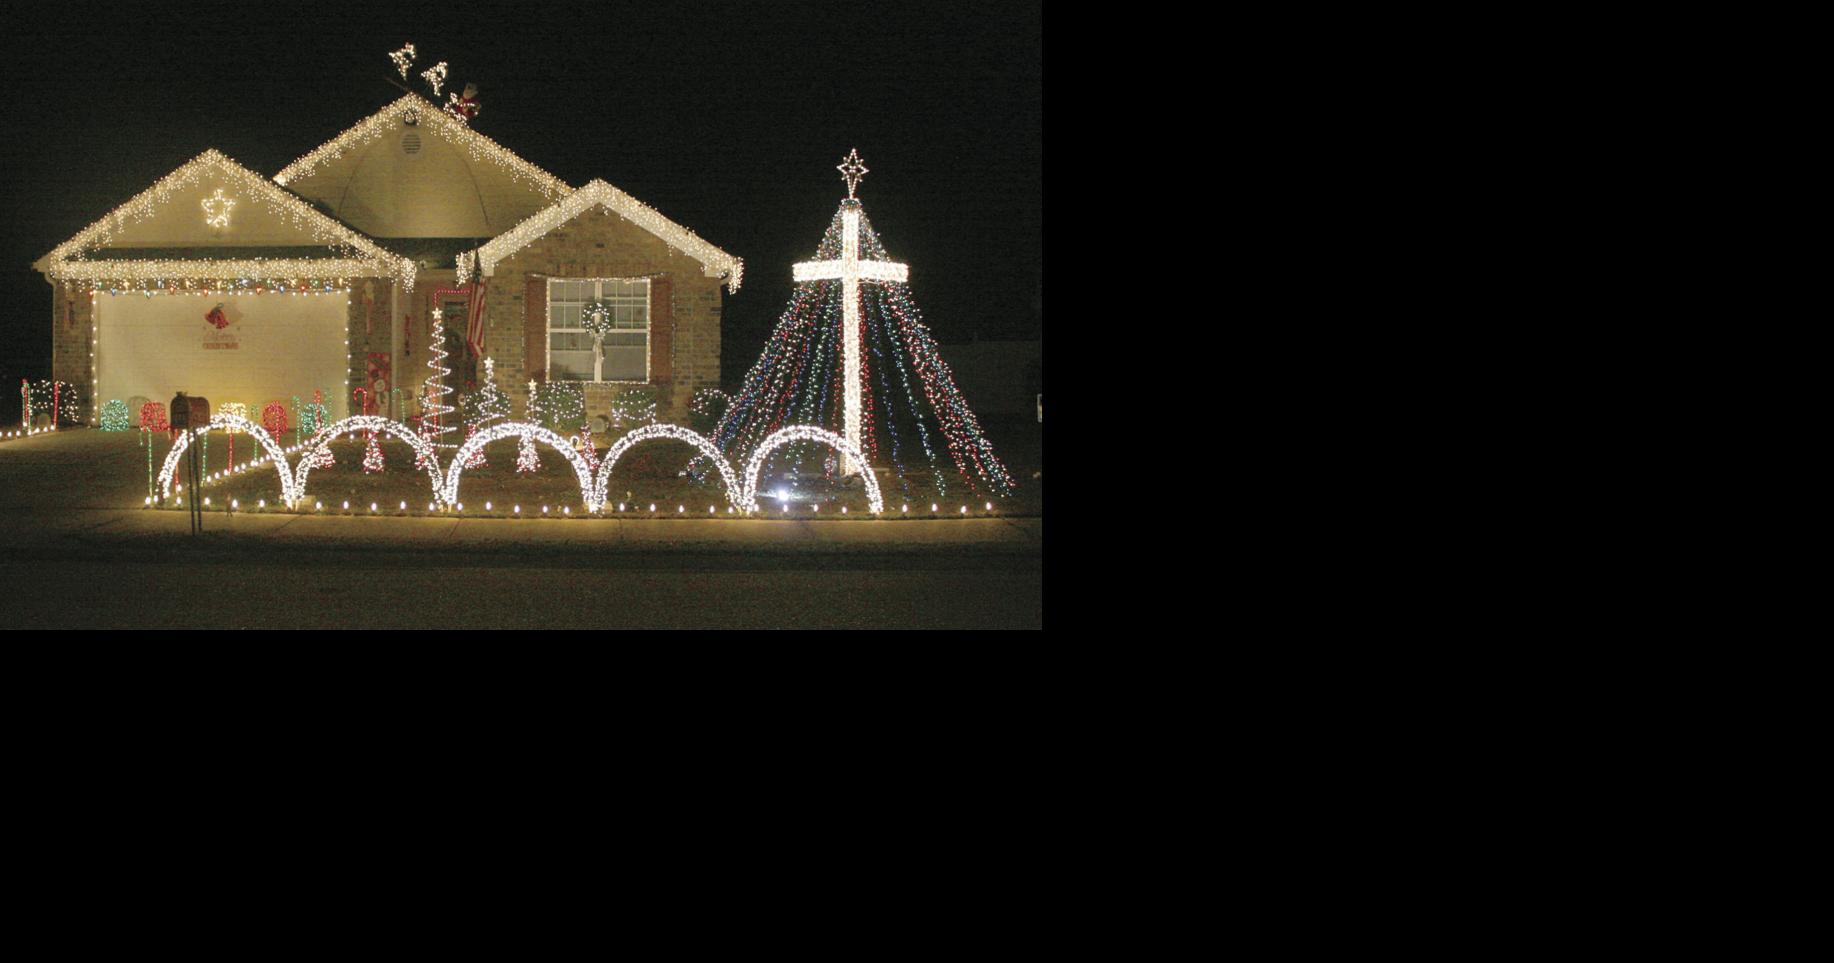 These Horry County residents turned their houses into Christmas light